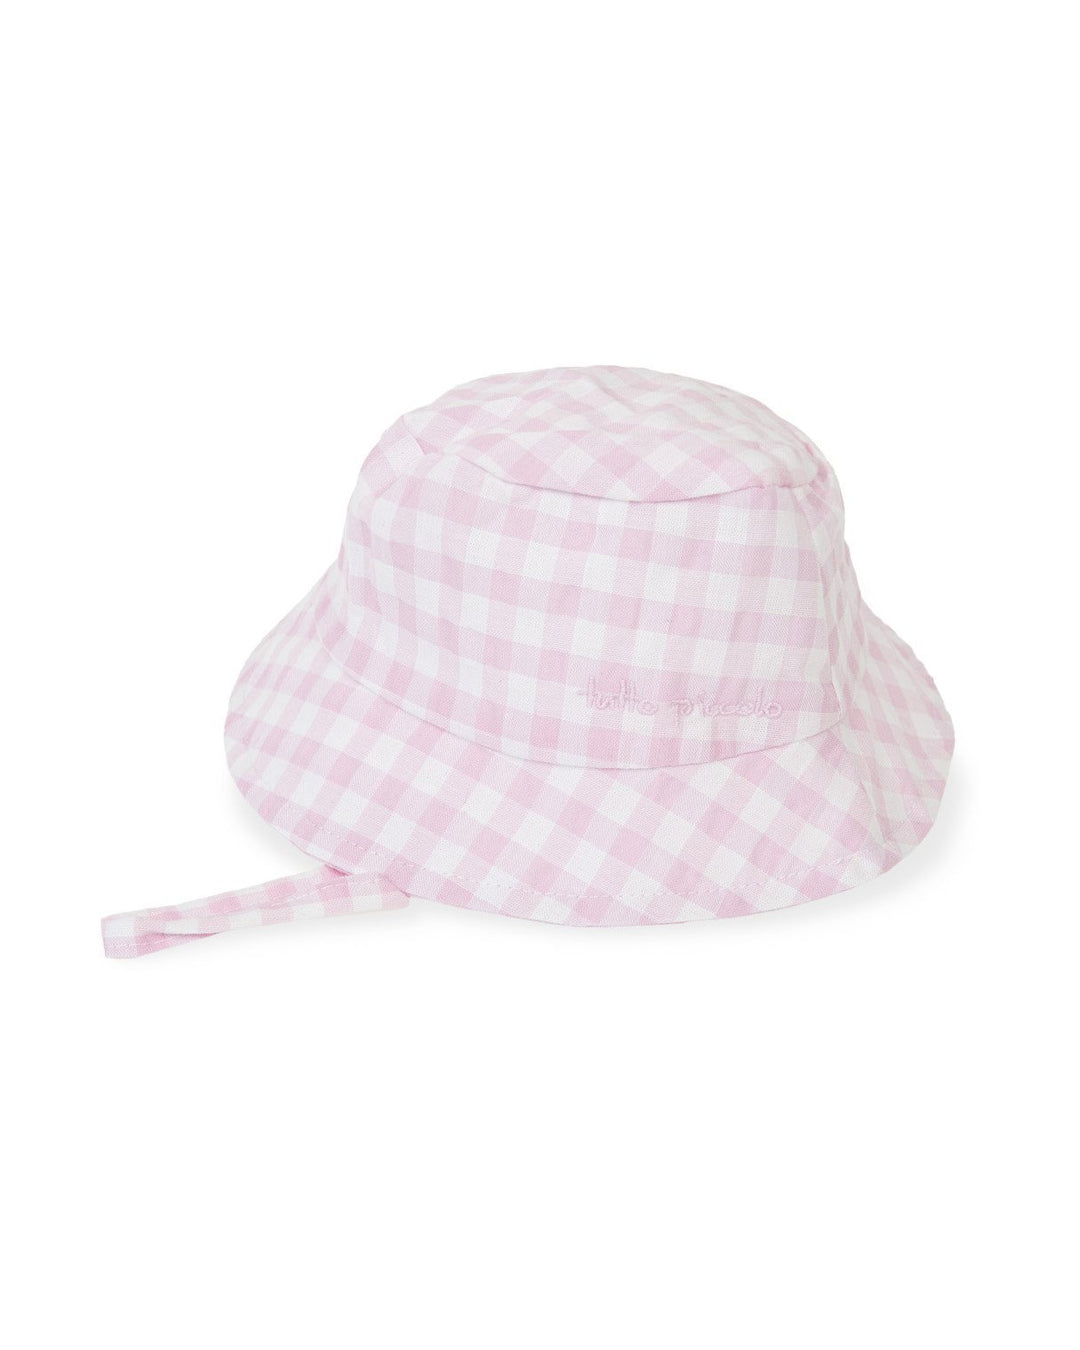 Tutto Piccolo Pink Seersucker Gingham Sun Hat | Millie and John